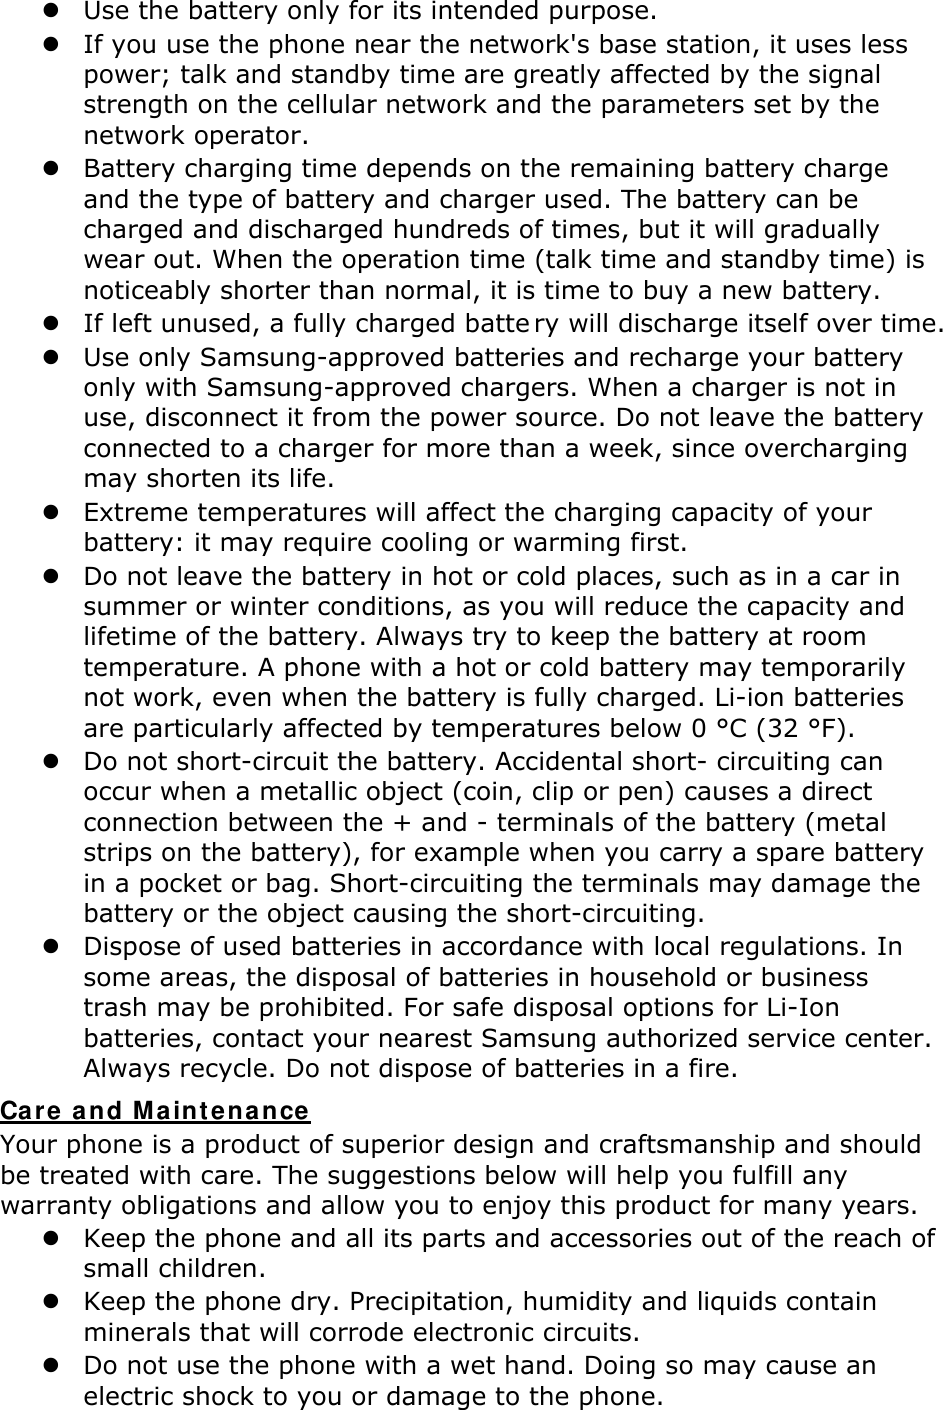  Use the battery only for its intended purpose.  If you use the phone near the network&apos;s base station, it uses less power; talk and standby time are greatly affected by the signal strength on the cellular network and the parameters set by the network operator.  Battery charging time depends on the remaining battery charge and the type of battery and charger used. The battery can be charged and discharged hundreds of times, but it will gradually wear out. When the operation time (talk time and standby time) is noticeably shorter than normal, it is time to buy a new battery.  If left unused, a fully charged batte ry will discharge itself over time.   Use only Samsung-approved batteries and recharge your battery only with Samsung-approved chargers. When a charger is not in use, disconnect it from the power source. Do not leave the battery connected to a charger for more than a week, since overcharging may shorten its life.  Extreme temperatures will affect the charging capacity of your battery: it may require cooling or warming first.  Do not leave the battery in hot or cold places, such as in a car in summer or winter conditions, as you will reduce the capacity and lifetime of the battery. Always try to keep the battery at room temperature. A phone with a hot or cold battery may temporarily not work, even when the battery is fully charged. Li-ion batteries are particularly affected by temperatures below 0 °C (32 °F).  Do not short-circuit the battery. Accidental short- circuiting can occur when a metallic object (coin, clip or pen) causes a direct connection between the + and - terminals of the battery (metal strips on the battery), for example when you carry a spare battery in a pocket or bag. Short-circuiting the terminals may damage the battery or the object causing the short-circuiting.  Dispose of used batteries in accordance with local regulations. In some areas, the disposal of batteries in household or business trash may be prohibited. For safe disposal options for Li-Ion batteries, contact your nearest Samsung authorized service center. Always recycle. Do not dispose of batteries in a fire. Care  and Ma int enance Your phone is a product of superior design and craftsmanship and should be treated with care. The suggestions below will help you fulfill any warranty obligations and allow you to enjoy this product for many years.  Keep the phone and all its parts and accessories out of the reach of small children.  Keep the phone dry. Precipitation, humidity and liquids contain minerals that will corrode electronic circuits.  Do not use the phone with a wet hand. Doing so may cause an electric shock to you or damage to the phone. 